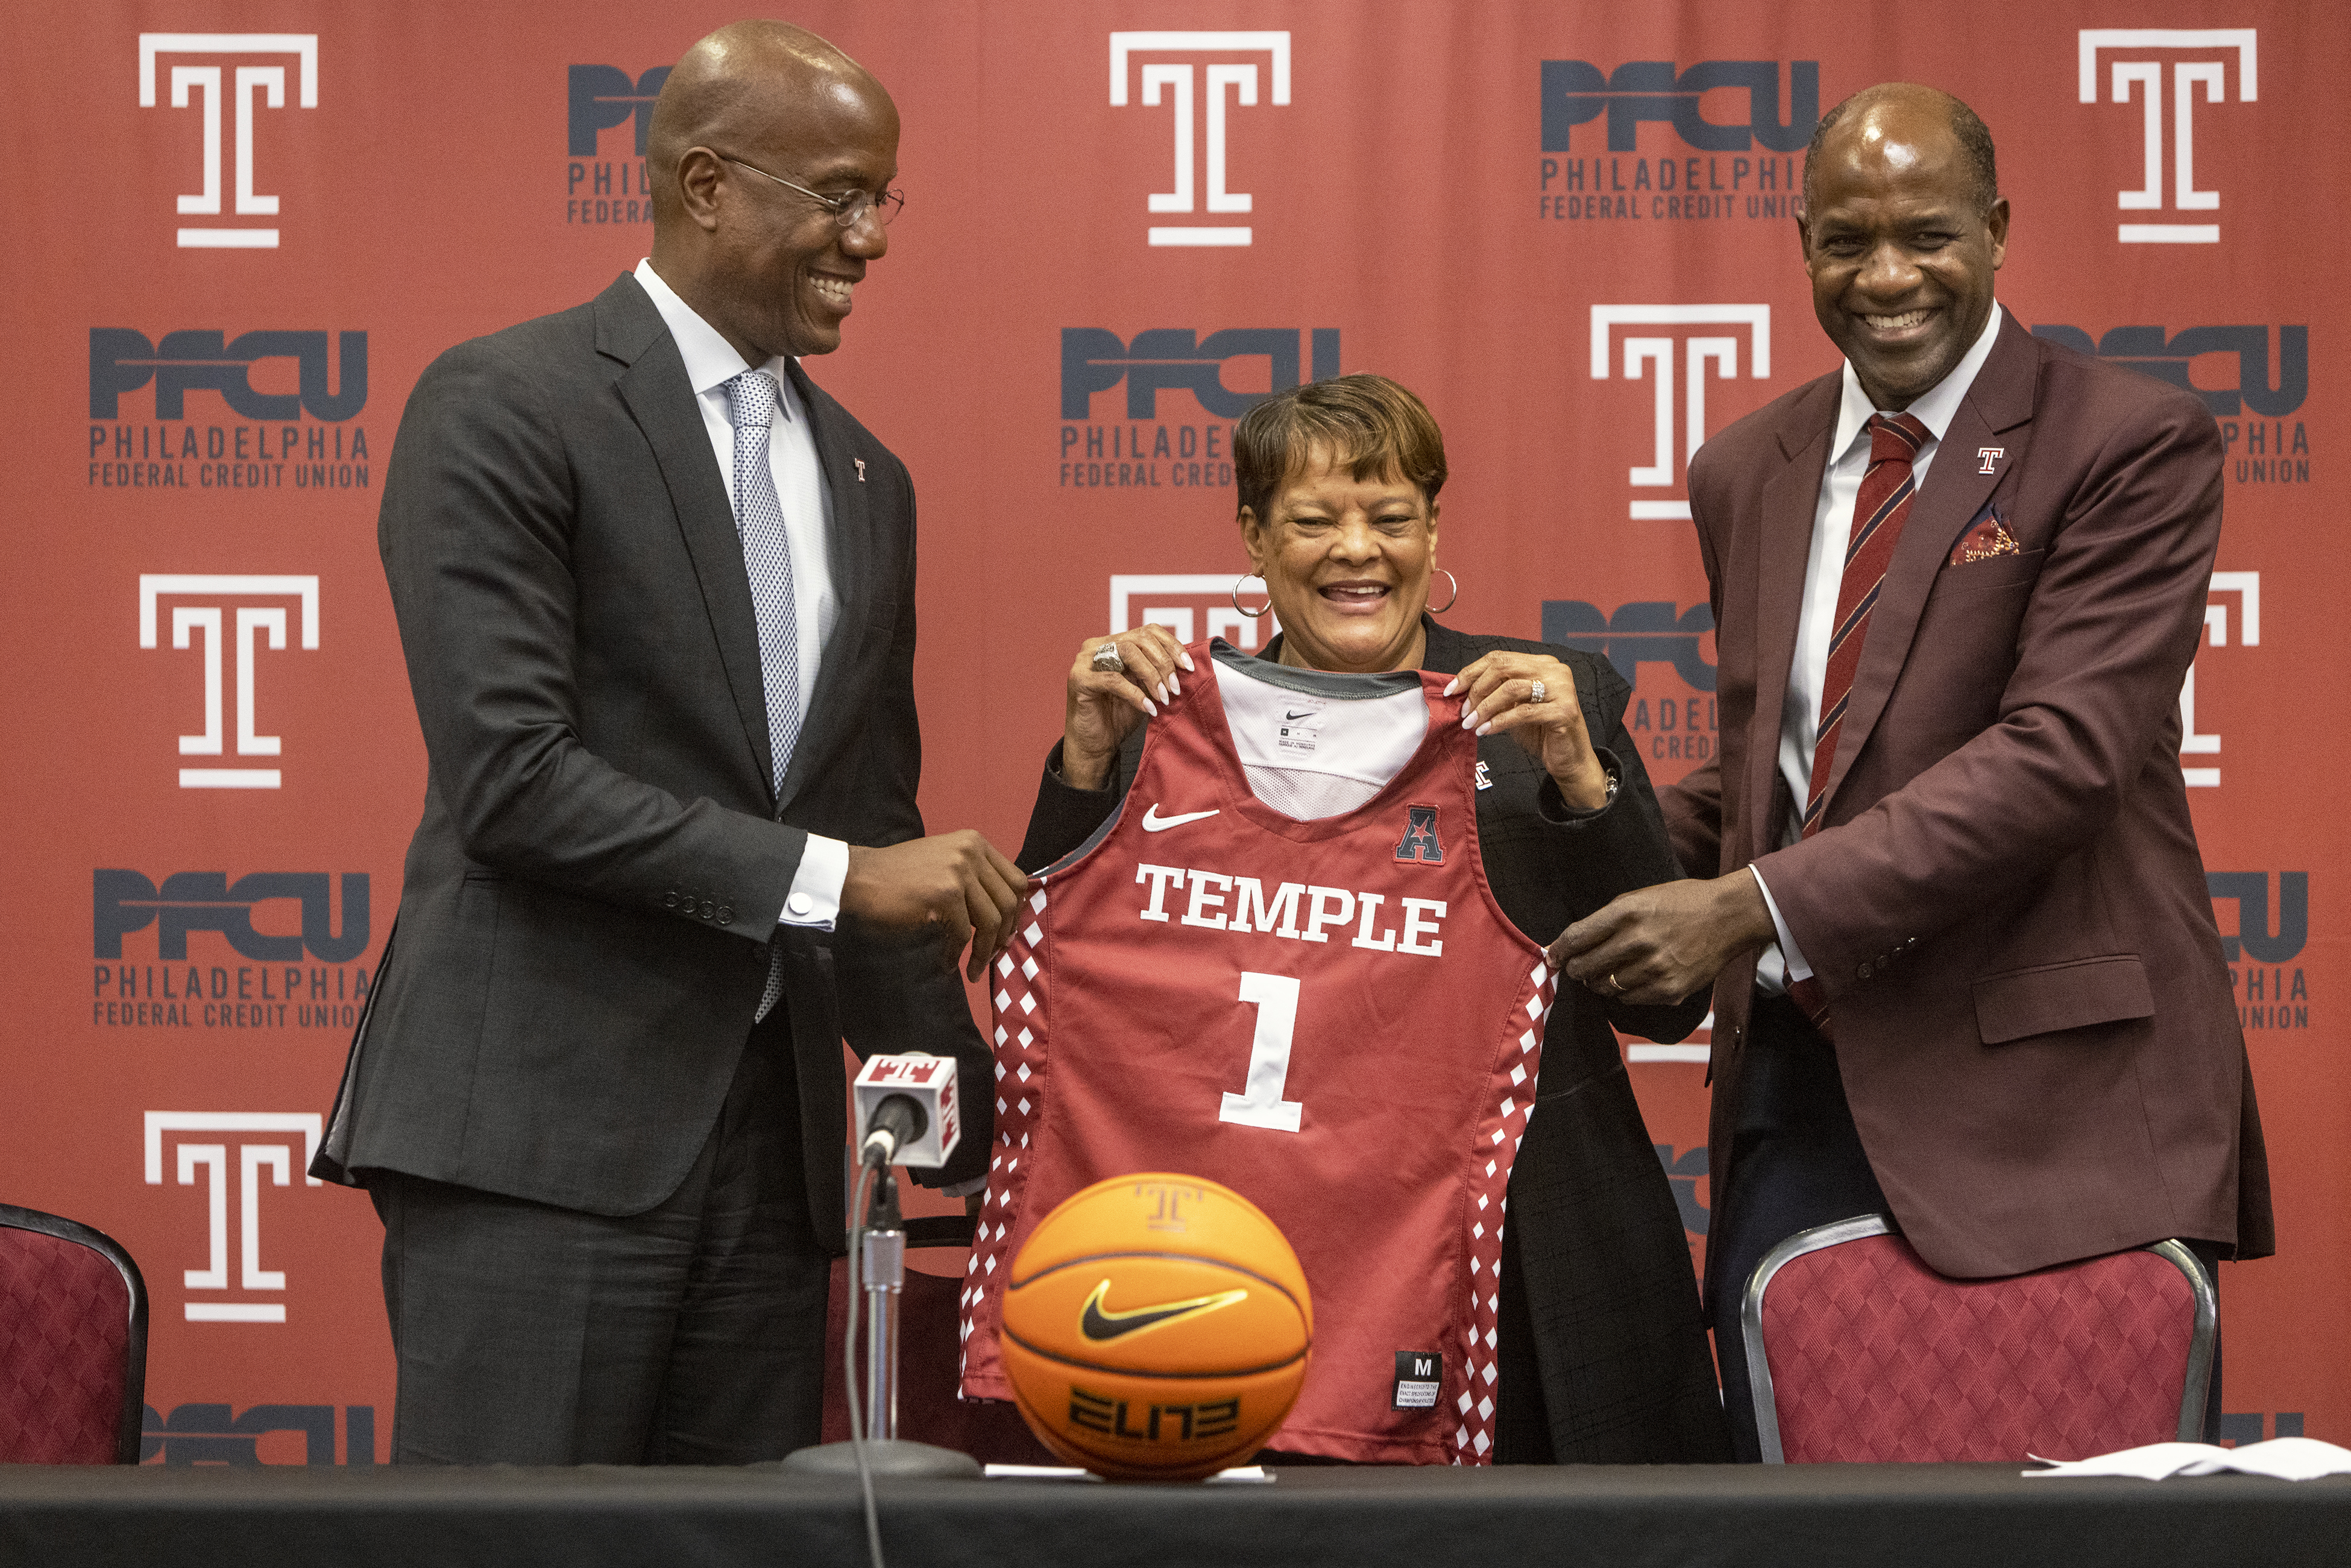 Nelson aims to lead Temple to first AAC Championship in program history -  The Temple News